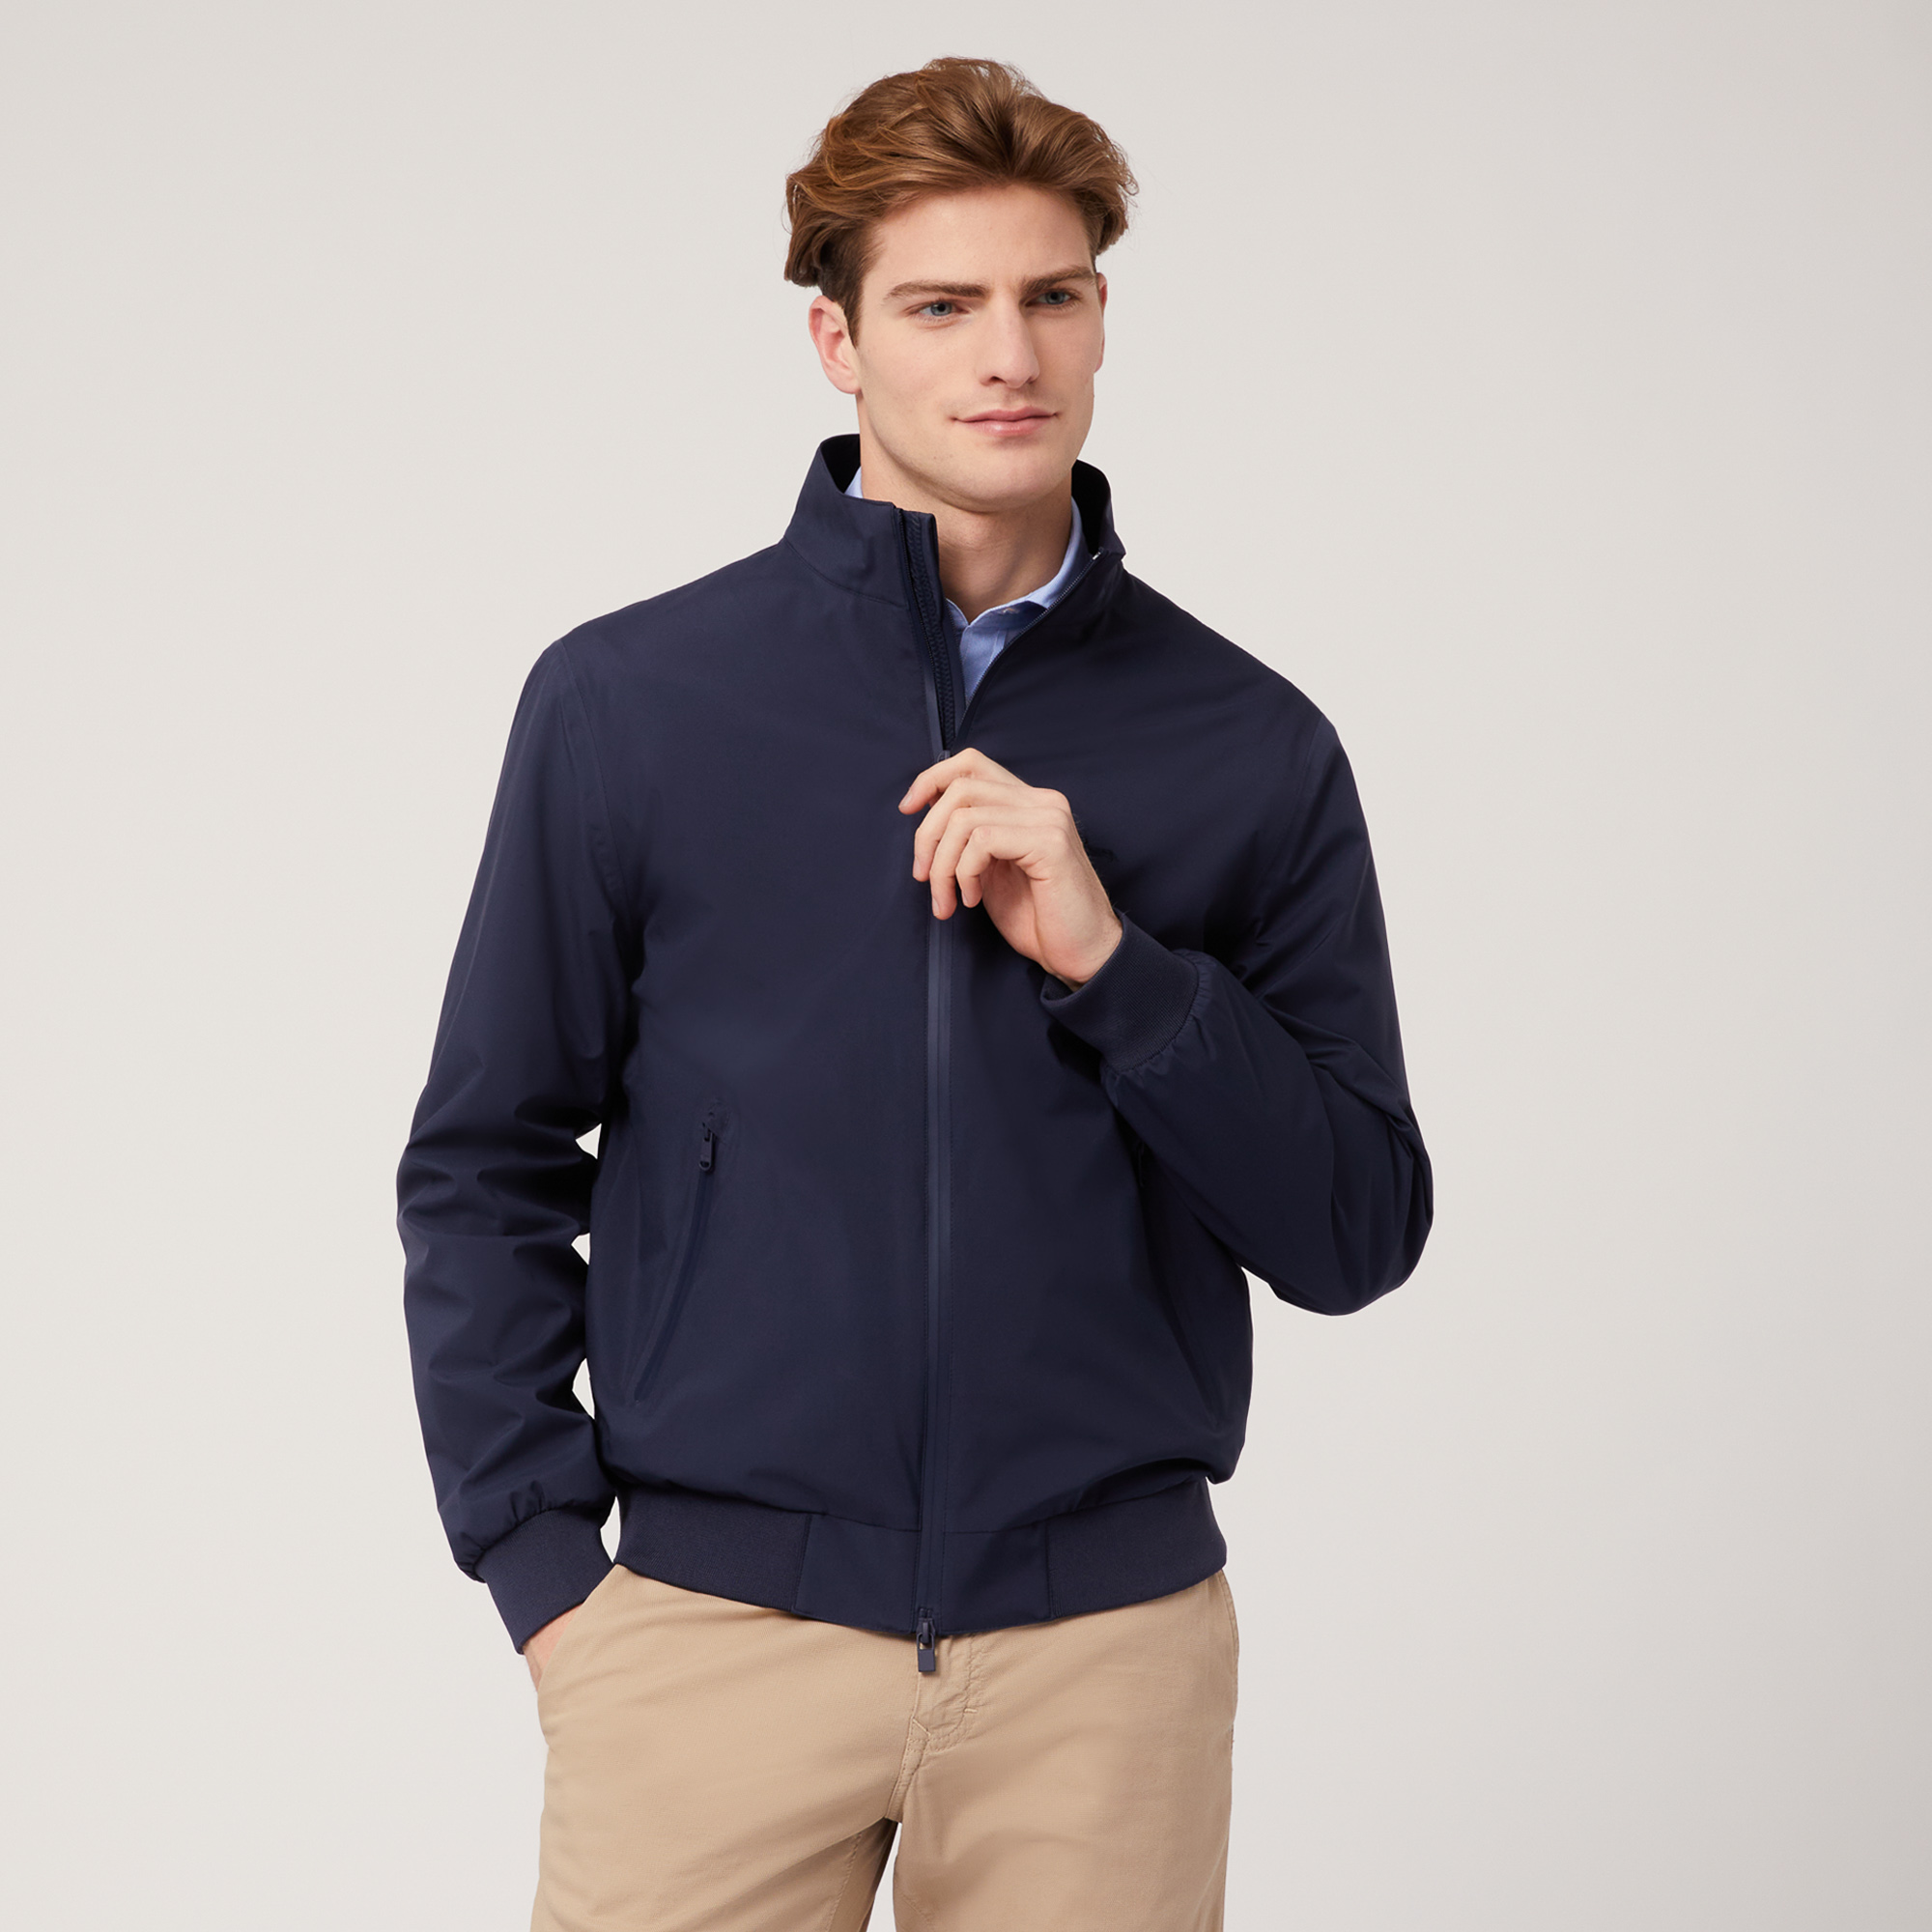 Giubbotto In Softshell, Blu Navy, large image number 0